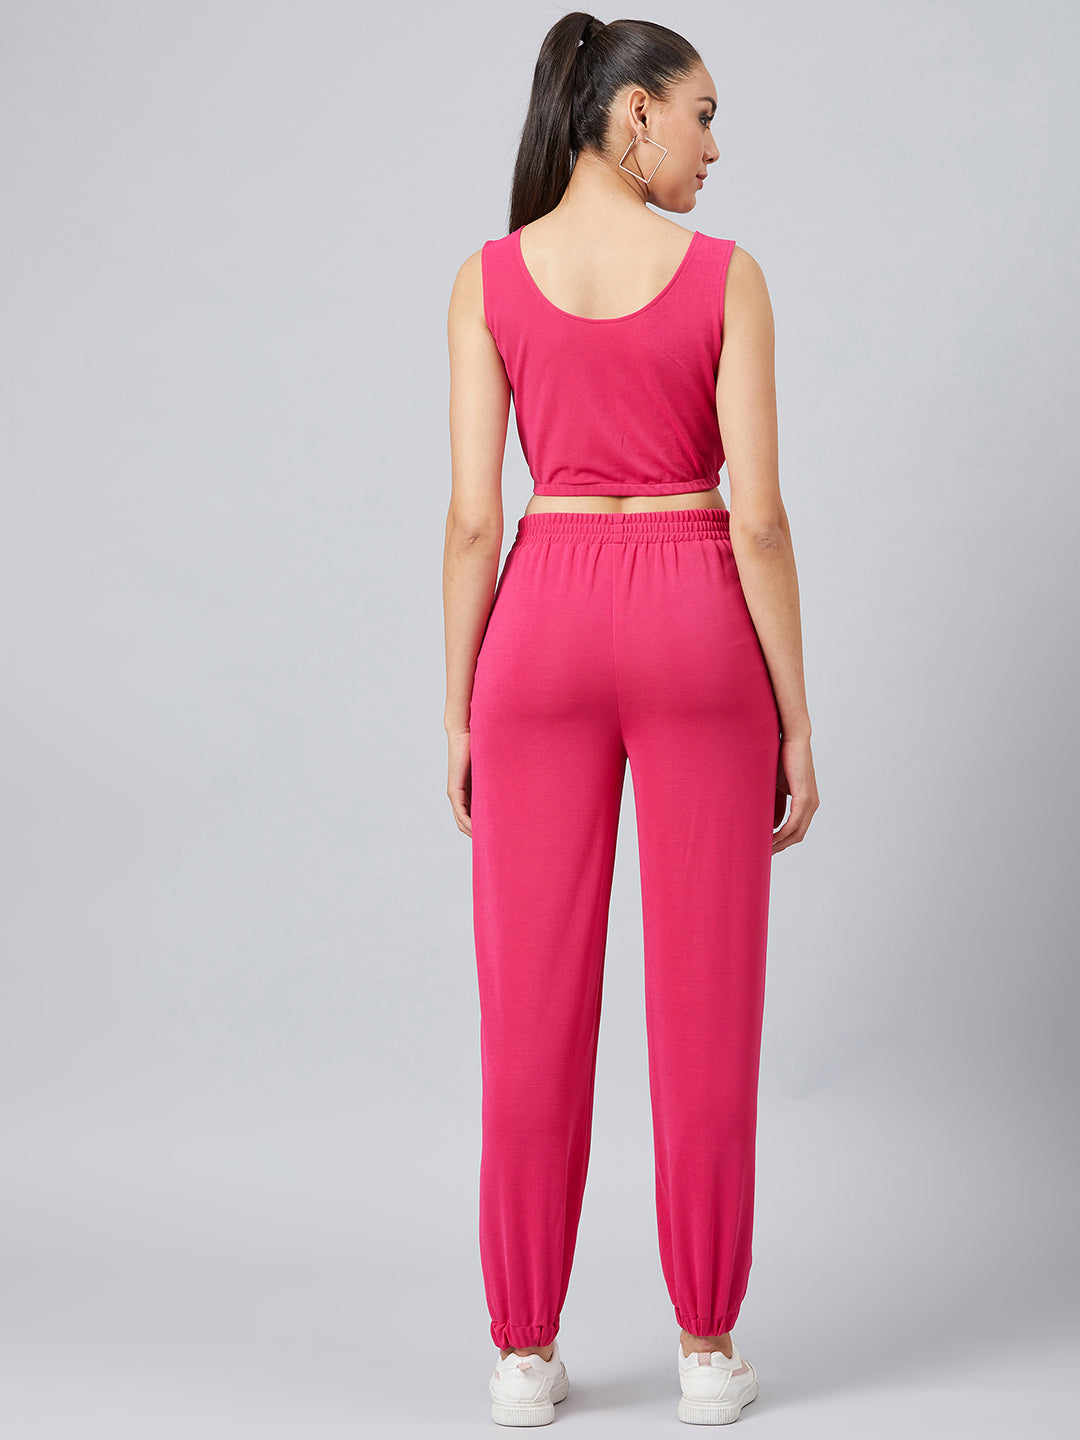 Athena Women Pink Solid Top with Trousers - Athena Lifestyle